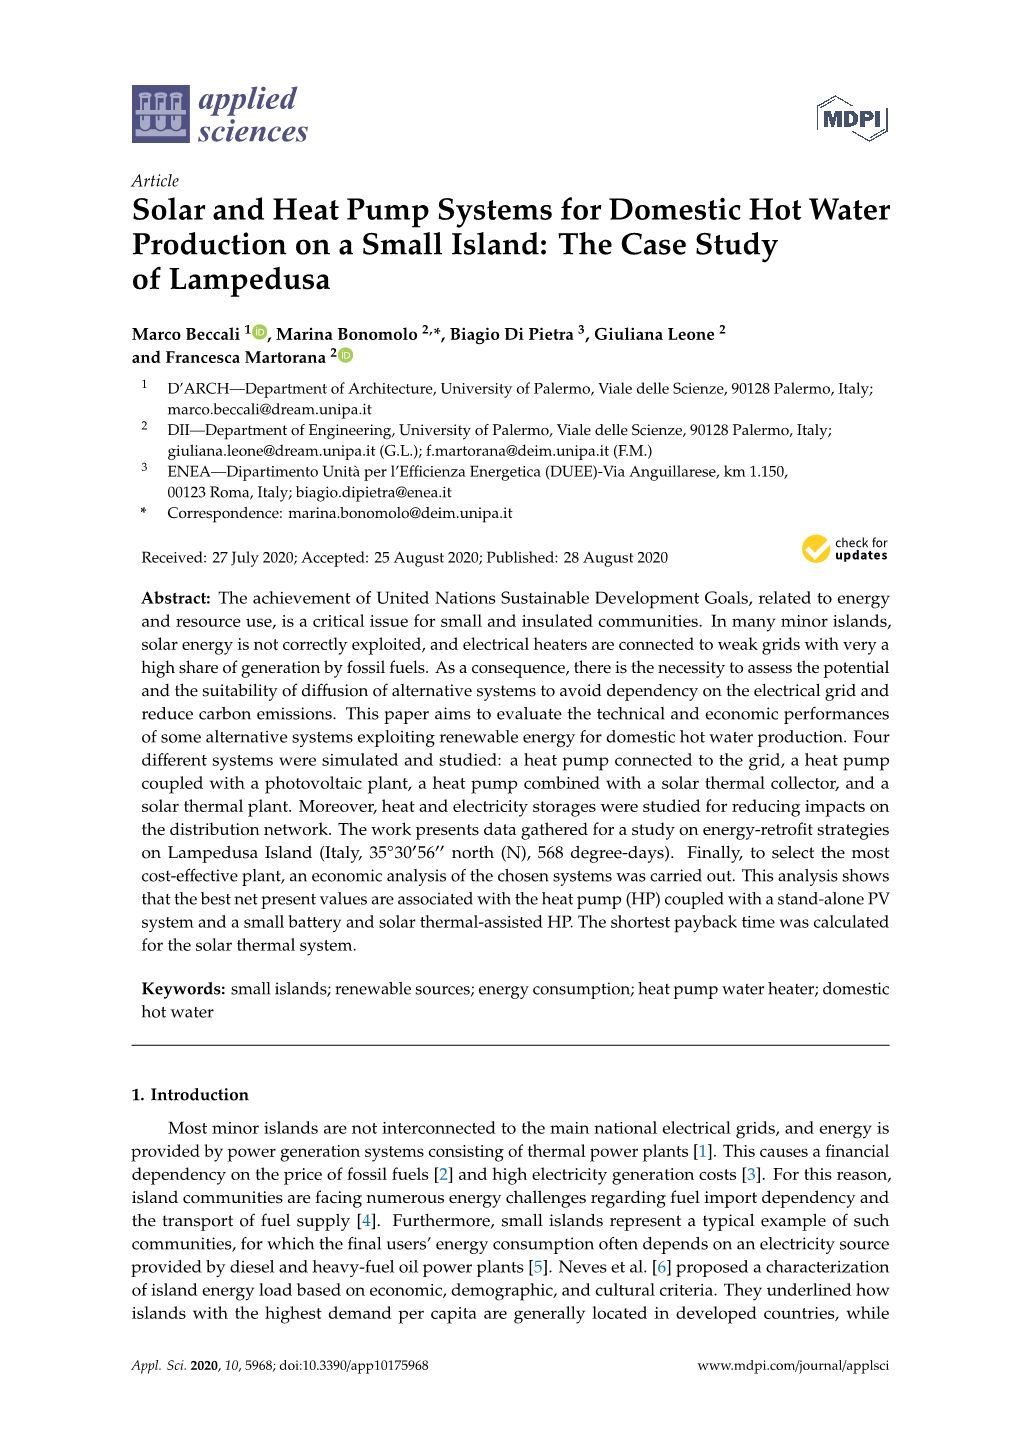 Solar and Heat Pump Systems for Domestic Hot Water Production on a Small Island: the Case Study of Lampedusa